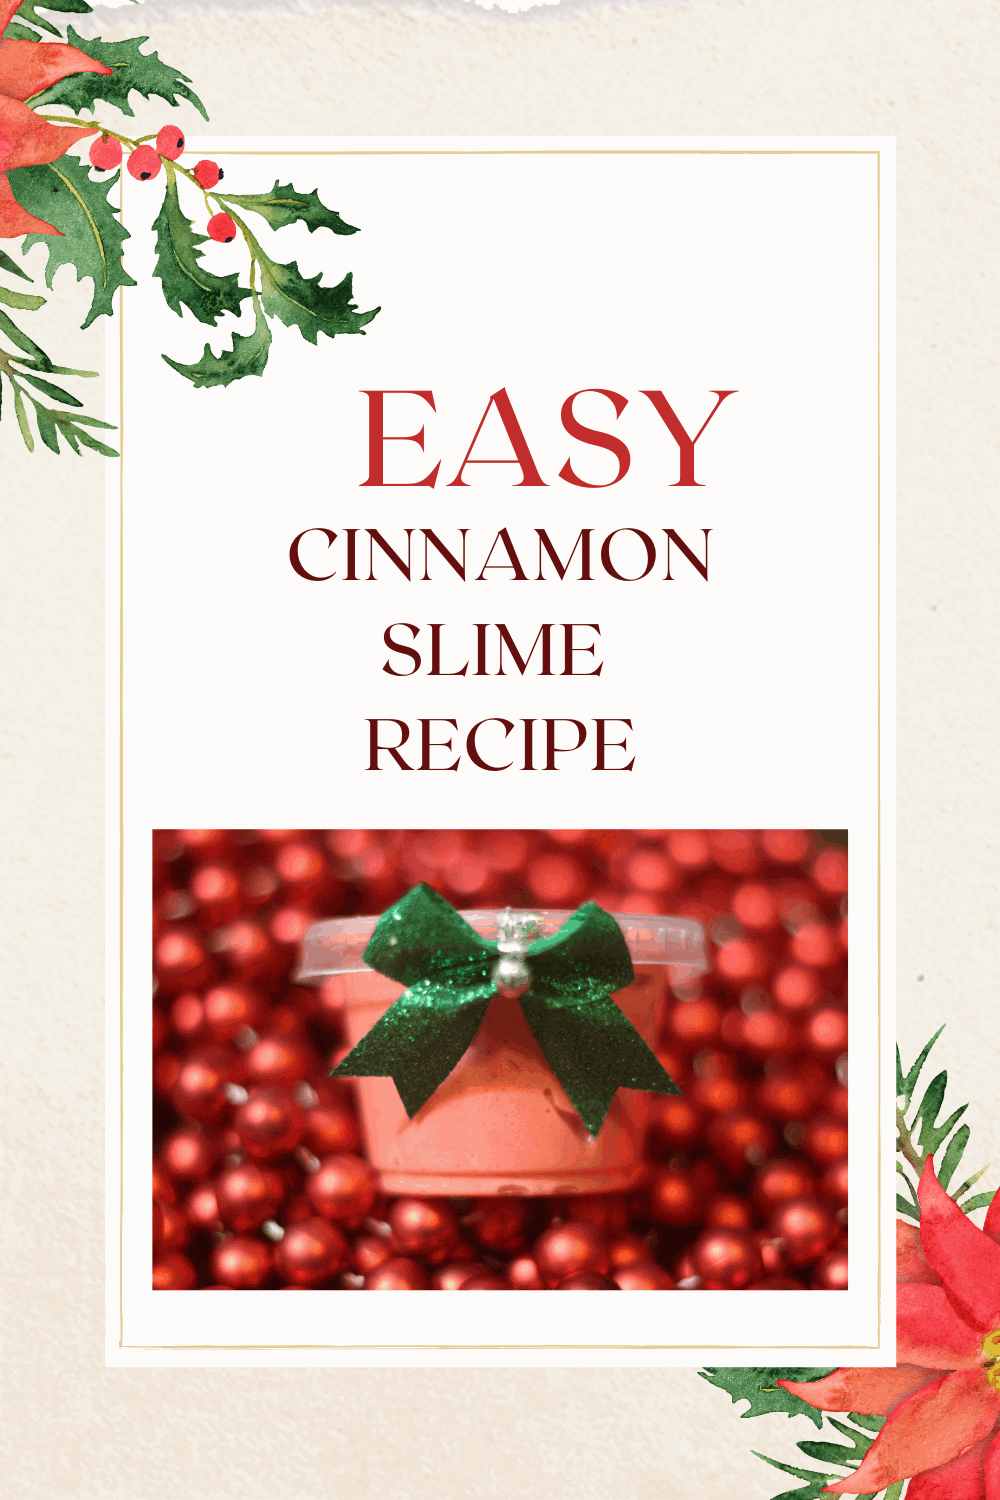 Cinnamon slime recipe perfect as a Christmas slime recipe or as a holiday party favor idea. This cinnamon slime smells amazing!